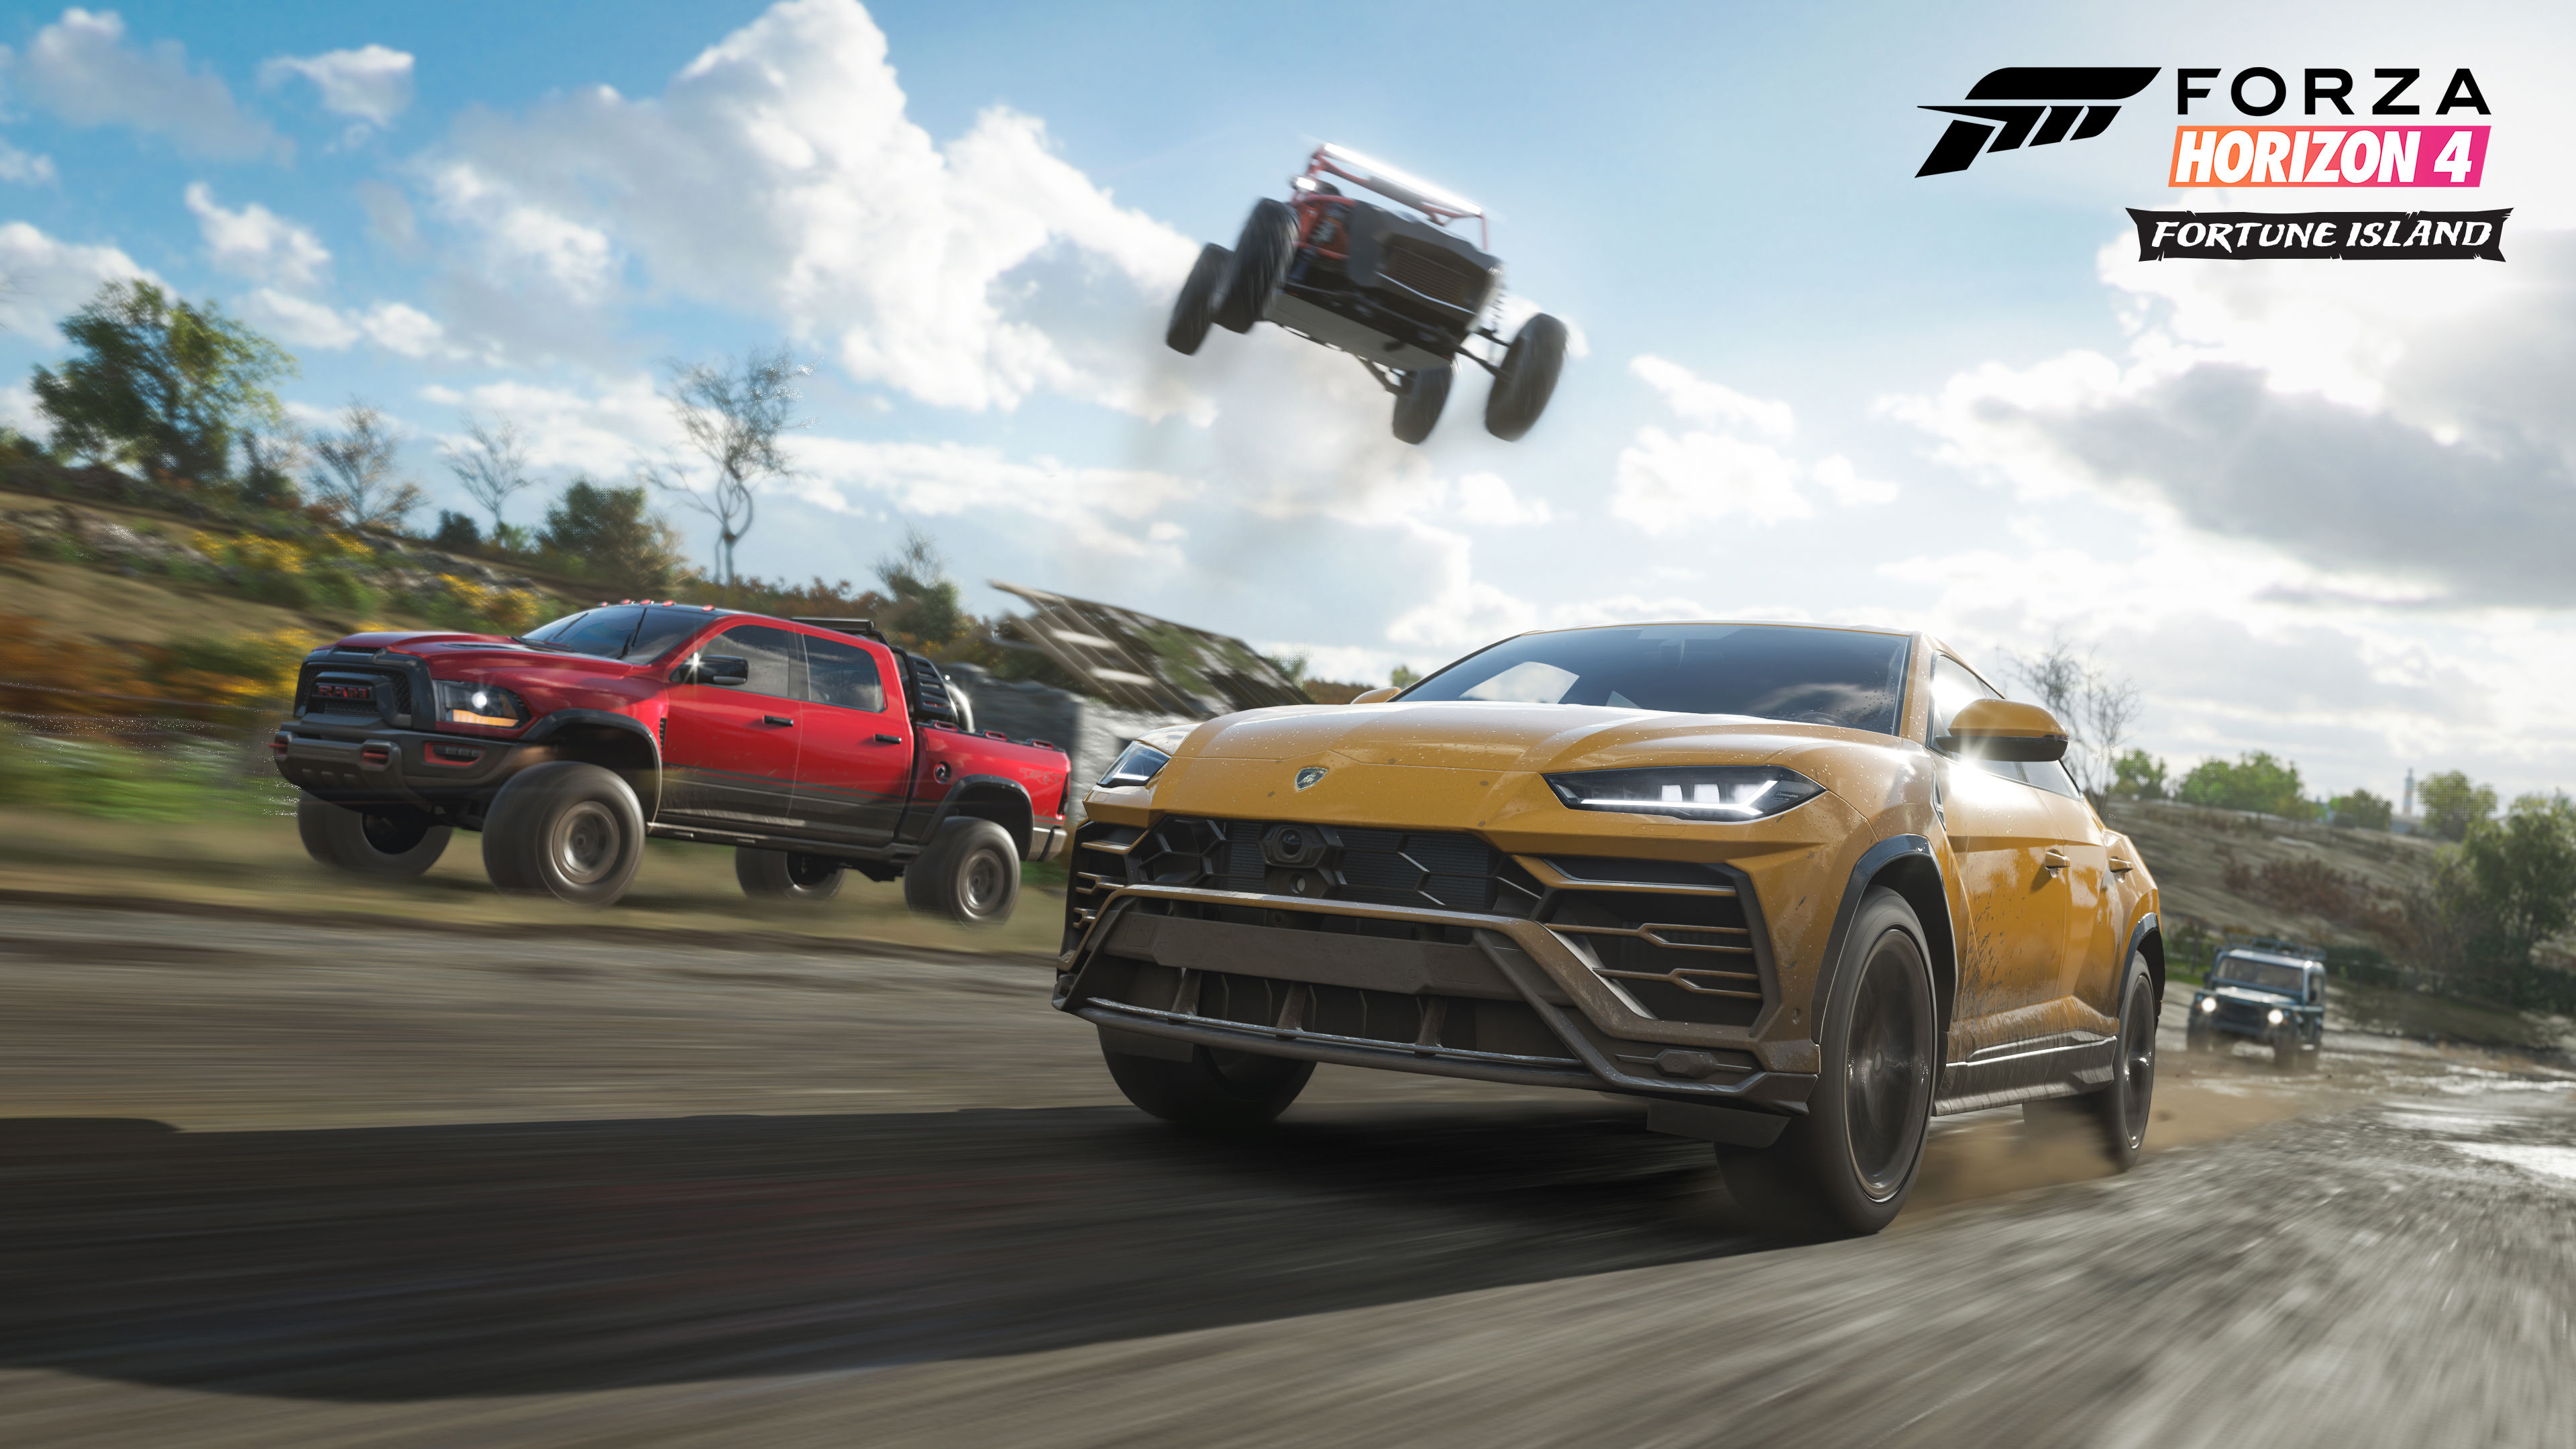 Play it Today: Fortune Island Now Available for Forza Horizon 4 - Xbox Wire - Forza Horizon 4 Xbox Live